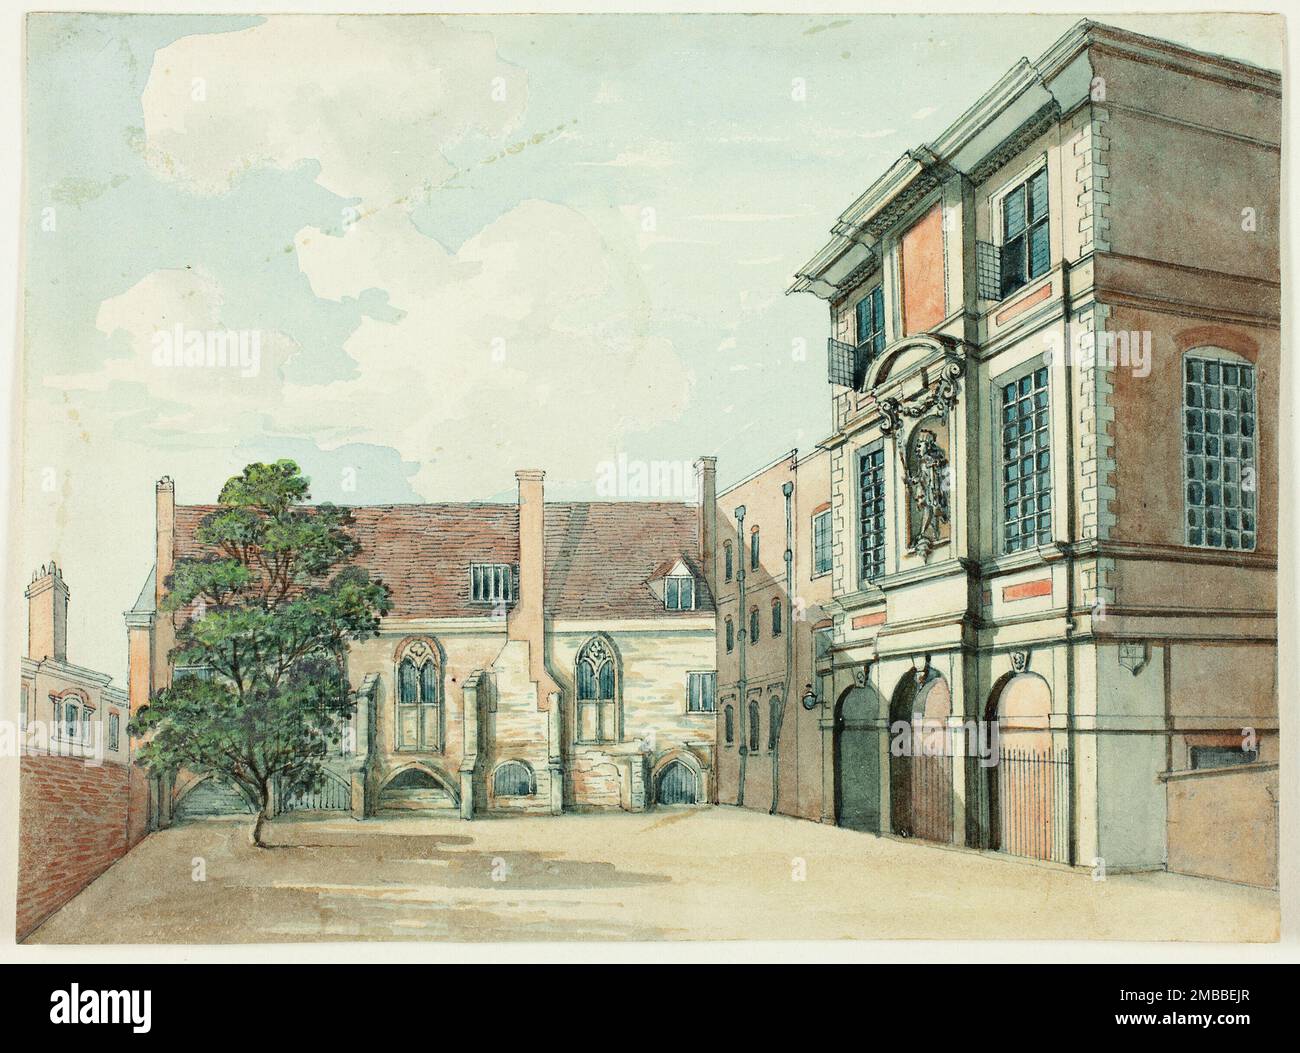 Remains of the Old Priory and Mathematical School, Christ's Hospital, n.d. Buildings in Newgate Street, City of London. Probably by Samuel Ireland, possibly Charles Tomkins. Stock Photo